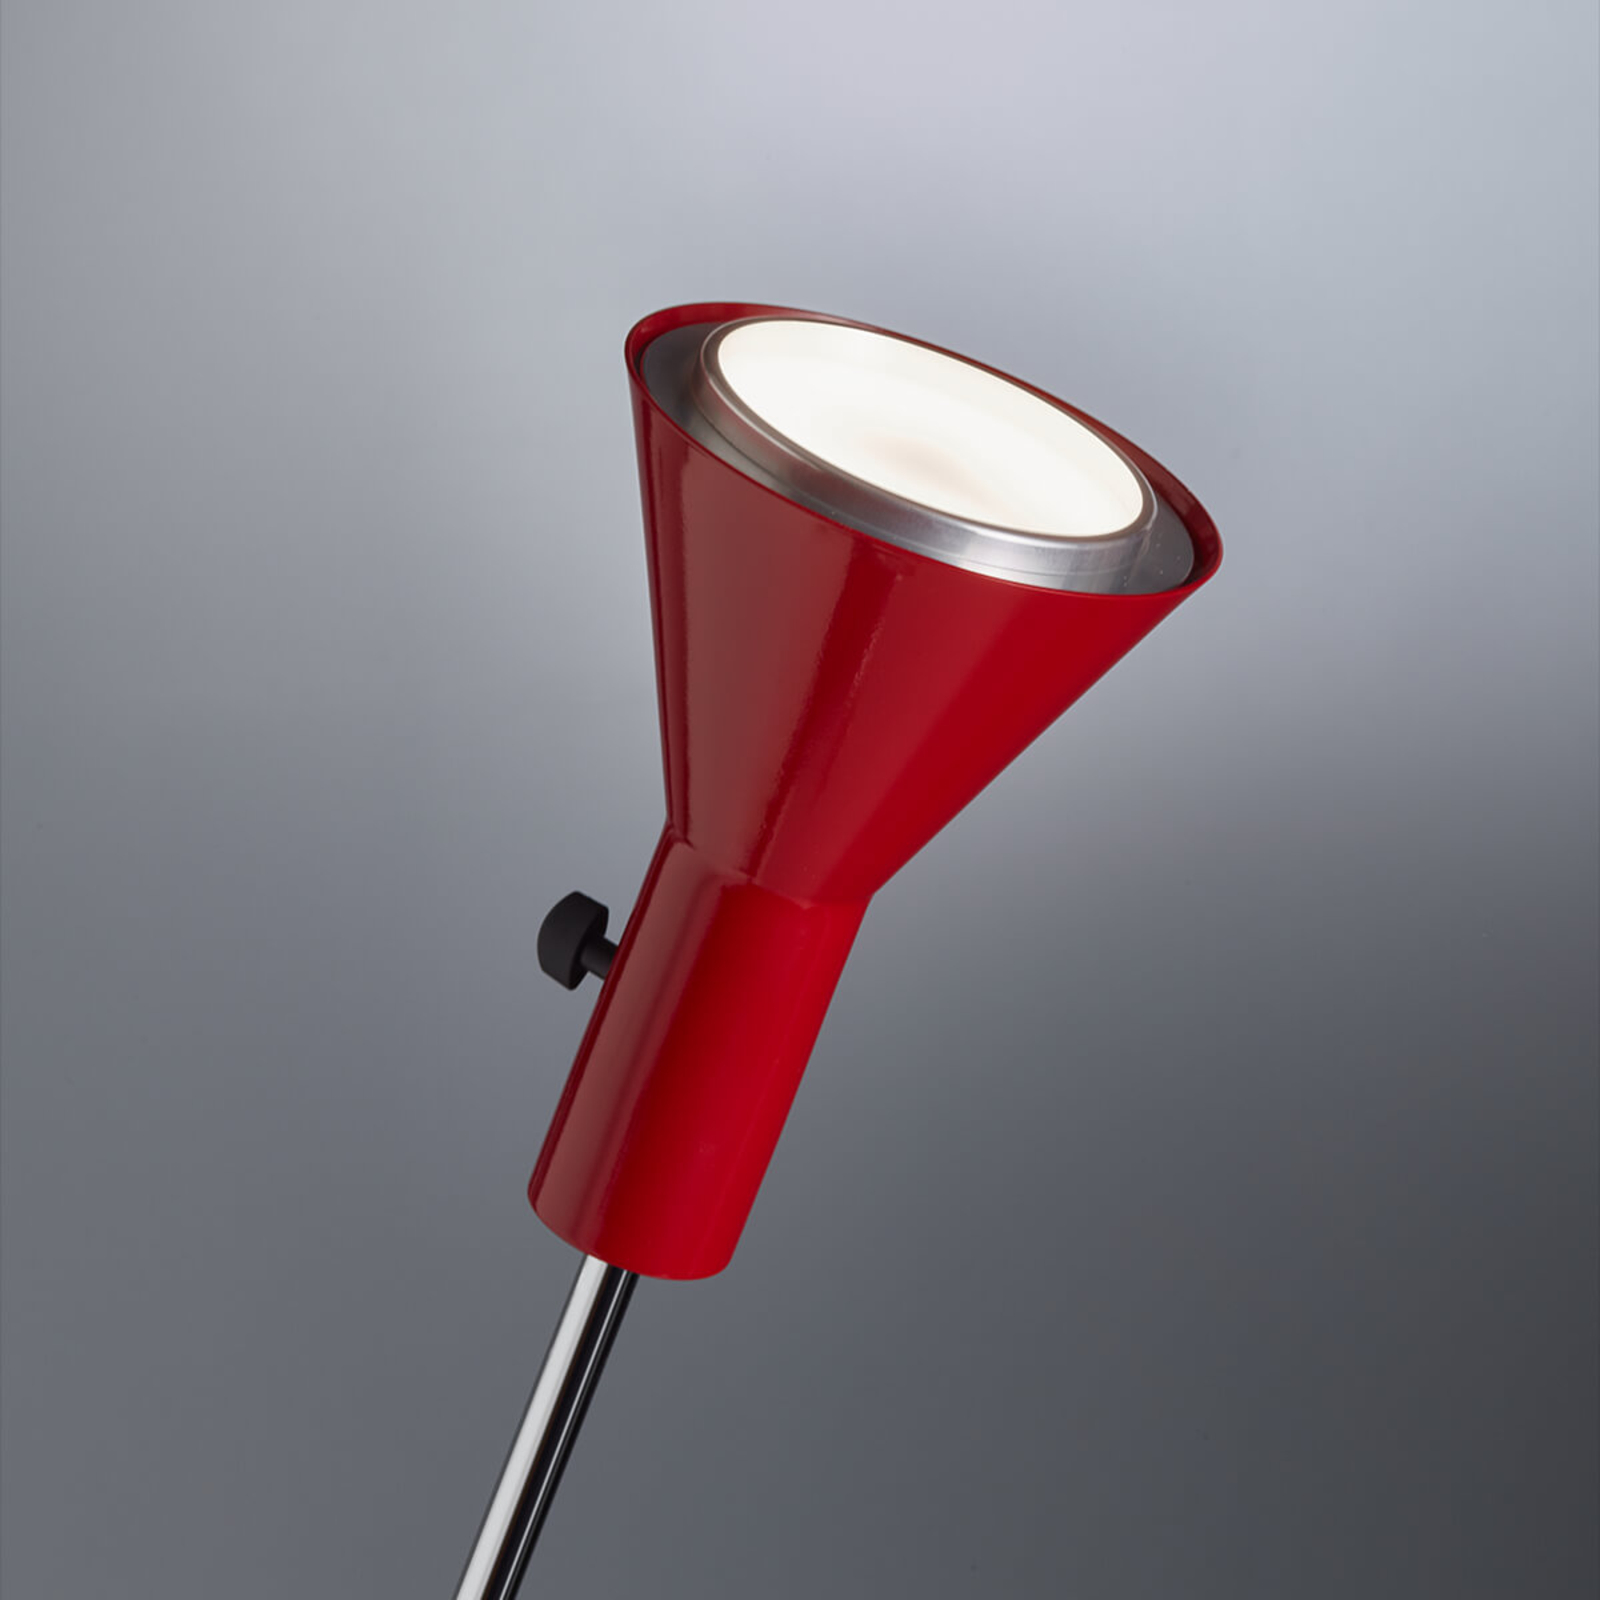 Dimmable LED floor lamp Gru in red